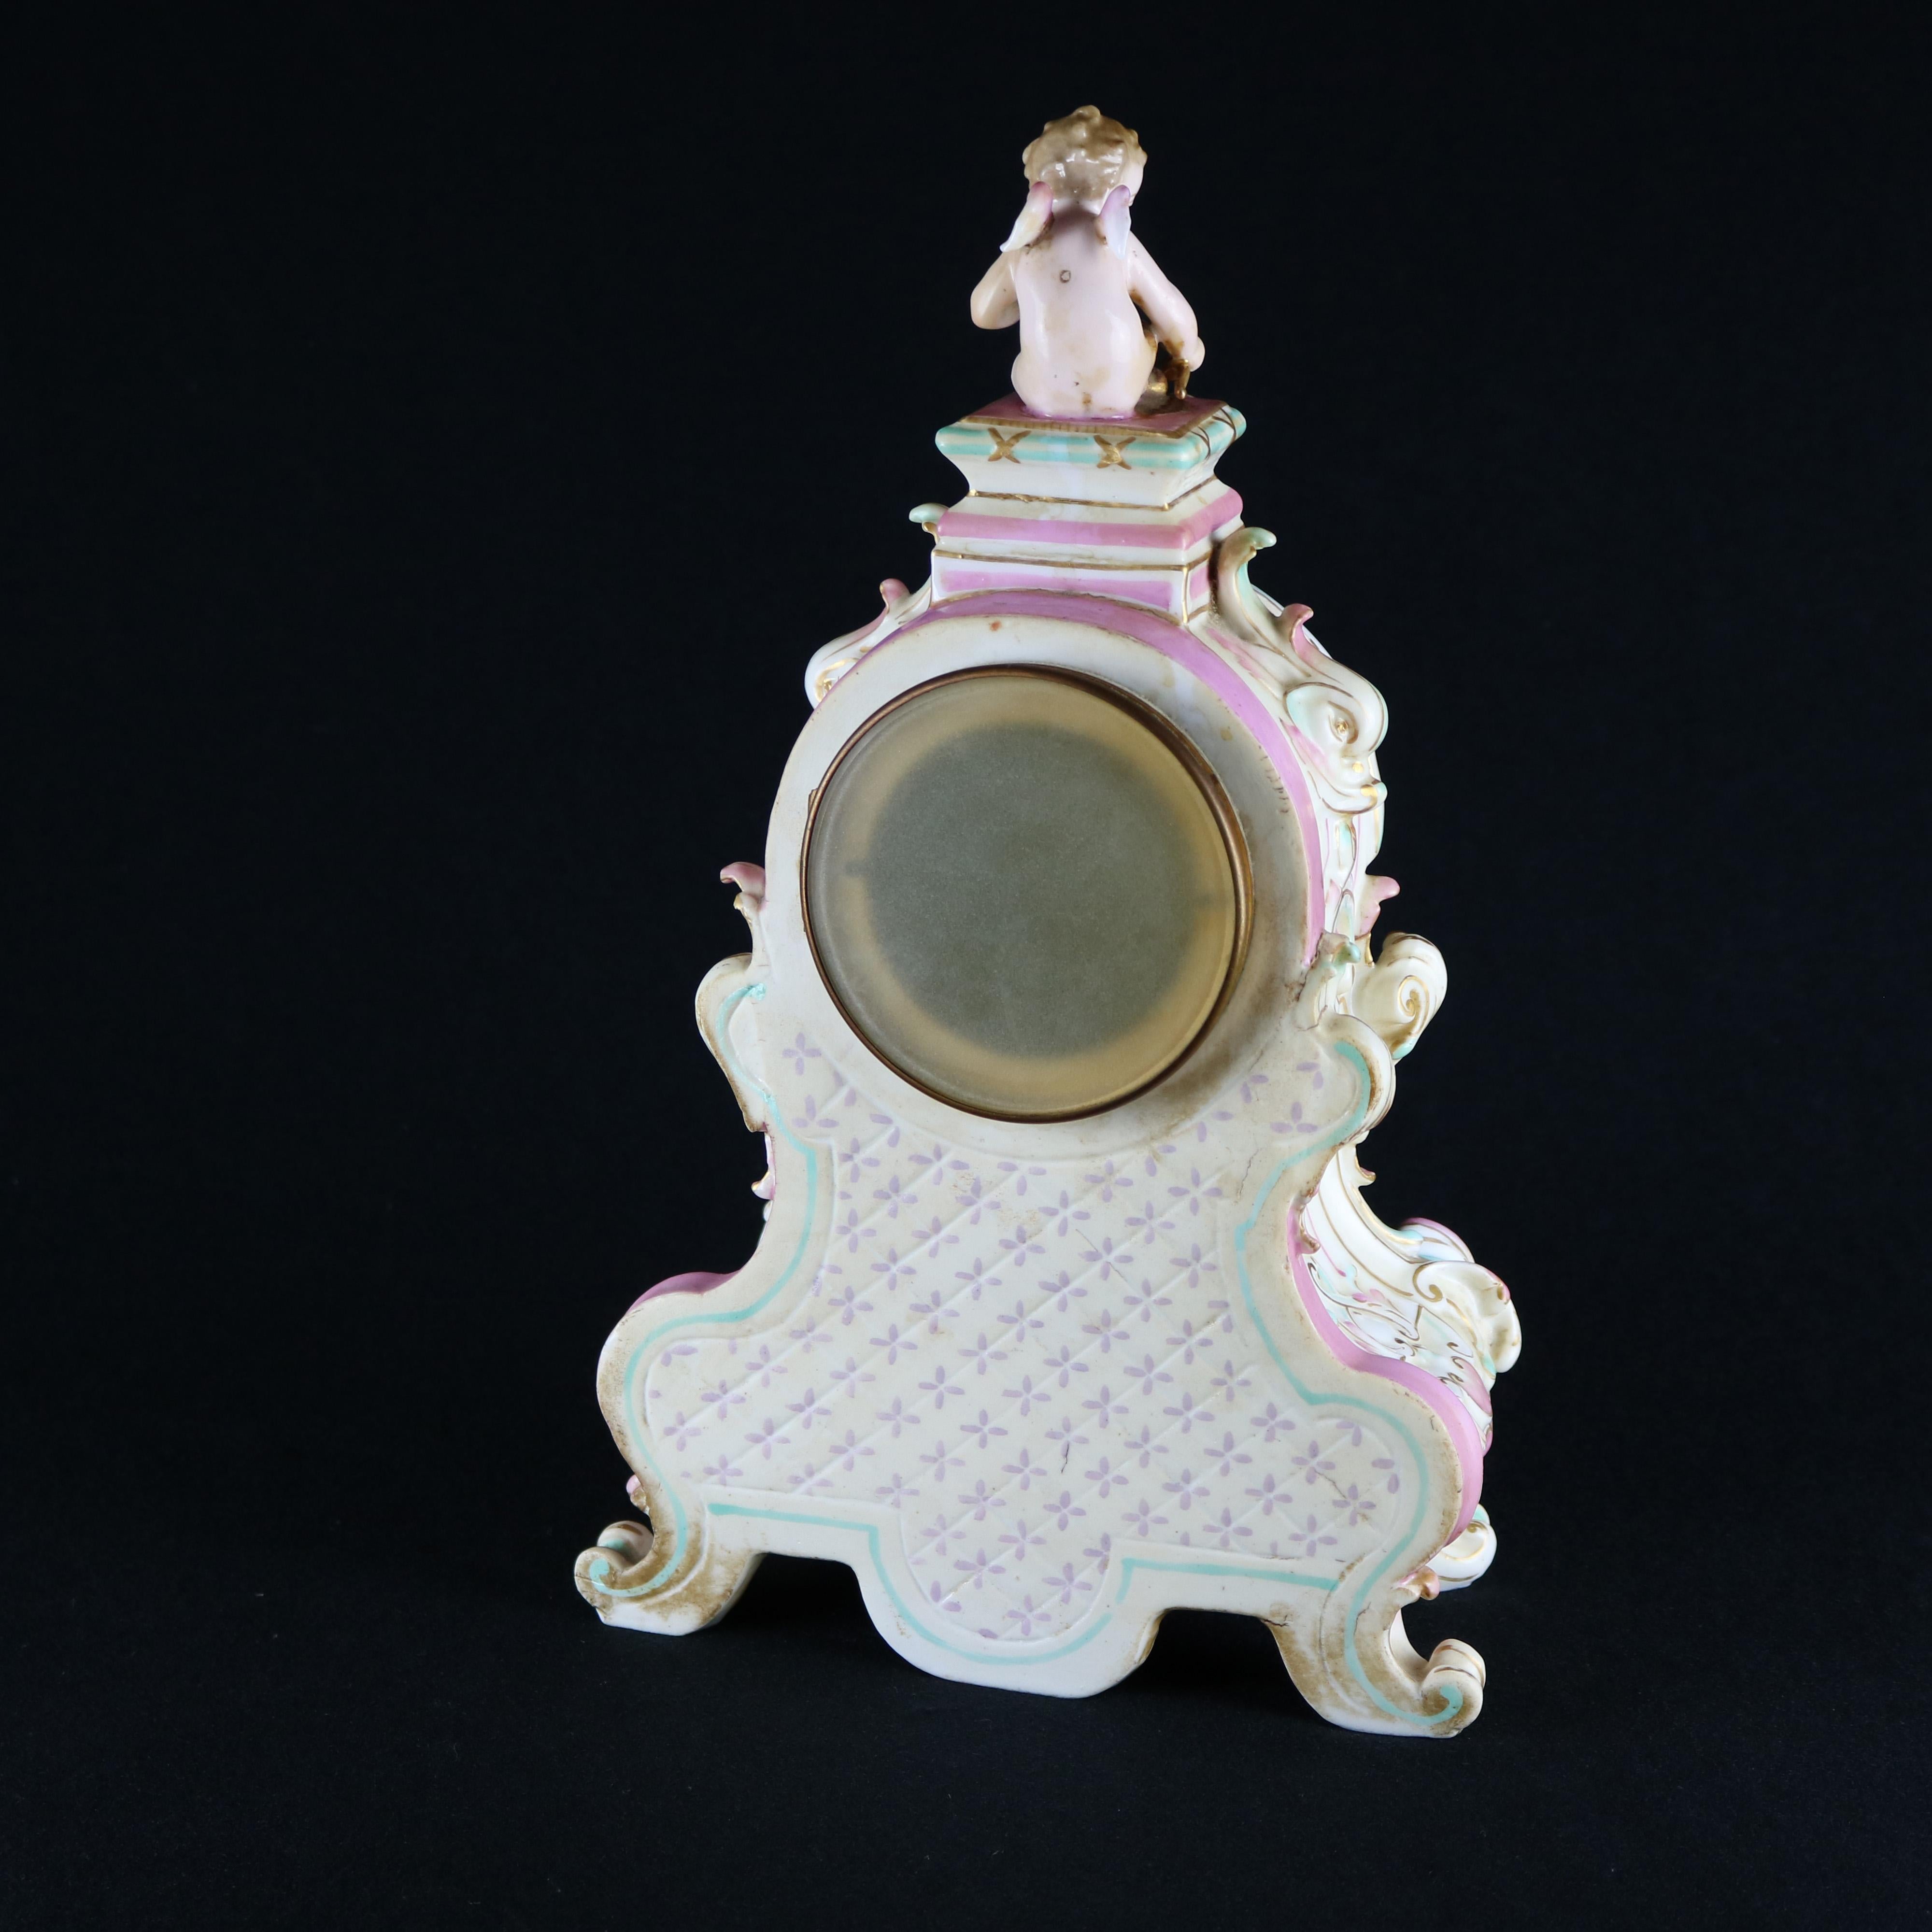 An antique and large figural German clock in the manner of Meissen offers cupid finial surmounting hand painted and gilt scroll and foliate decorated porcelain case obverse having Classical cherub scene and floral reserve, raised on scroll form feet